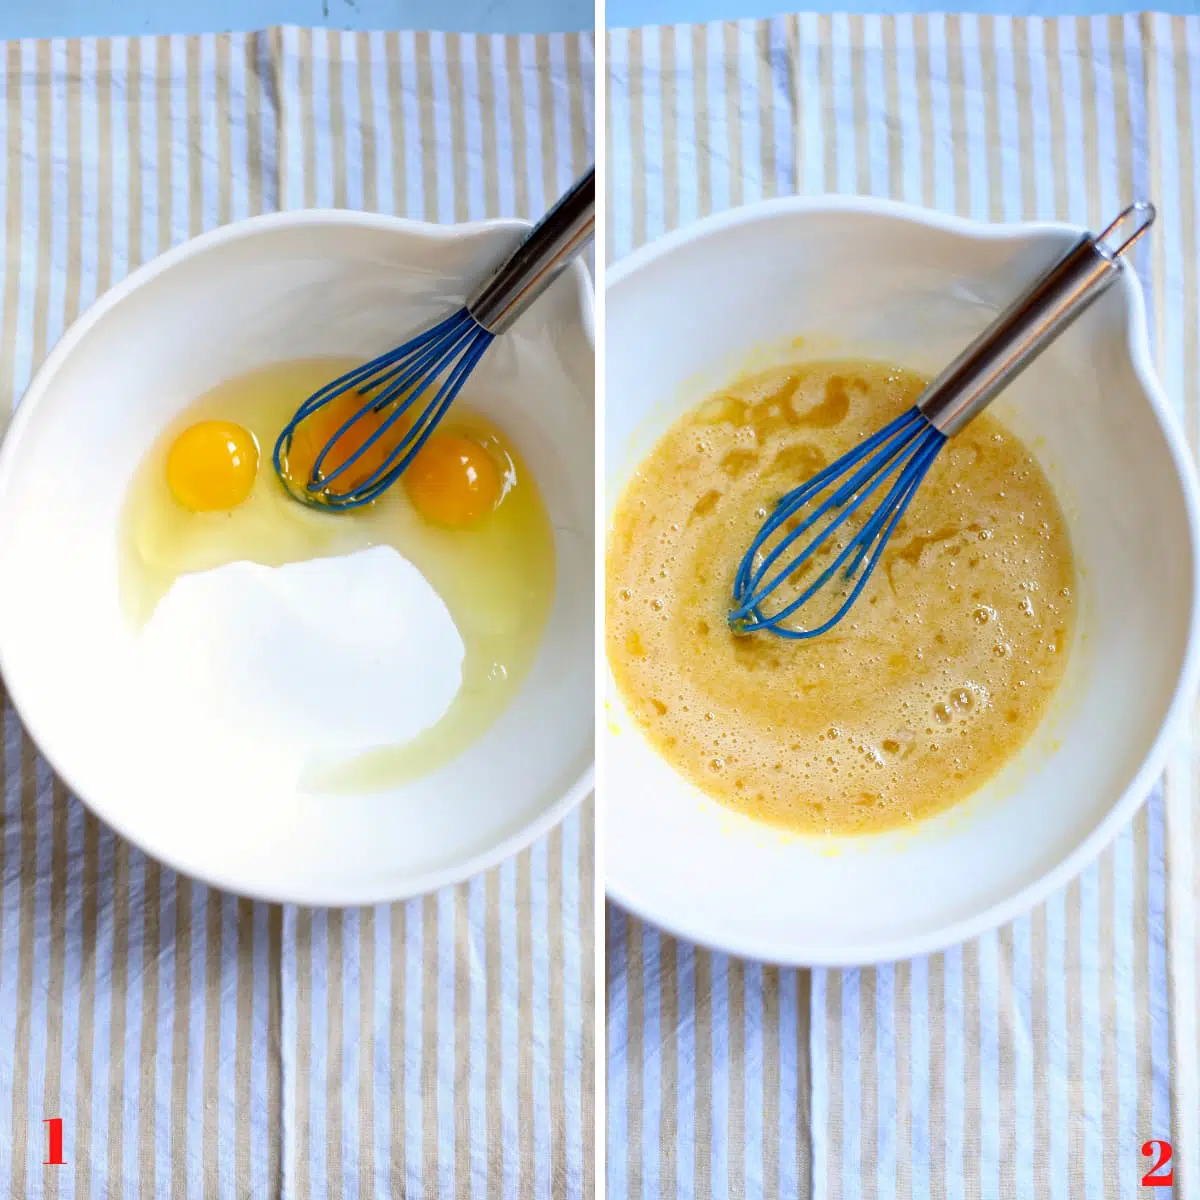 a before and after photo of eggs and sugar before and after mixing.